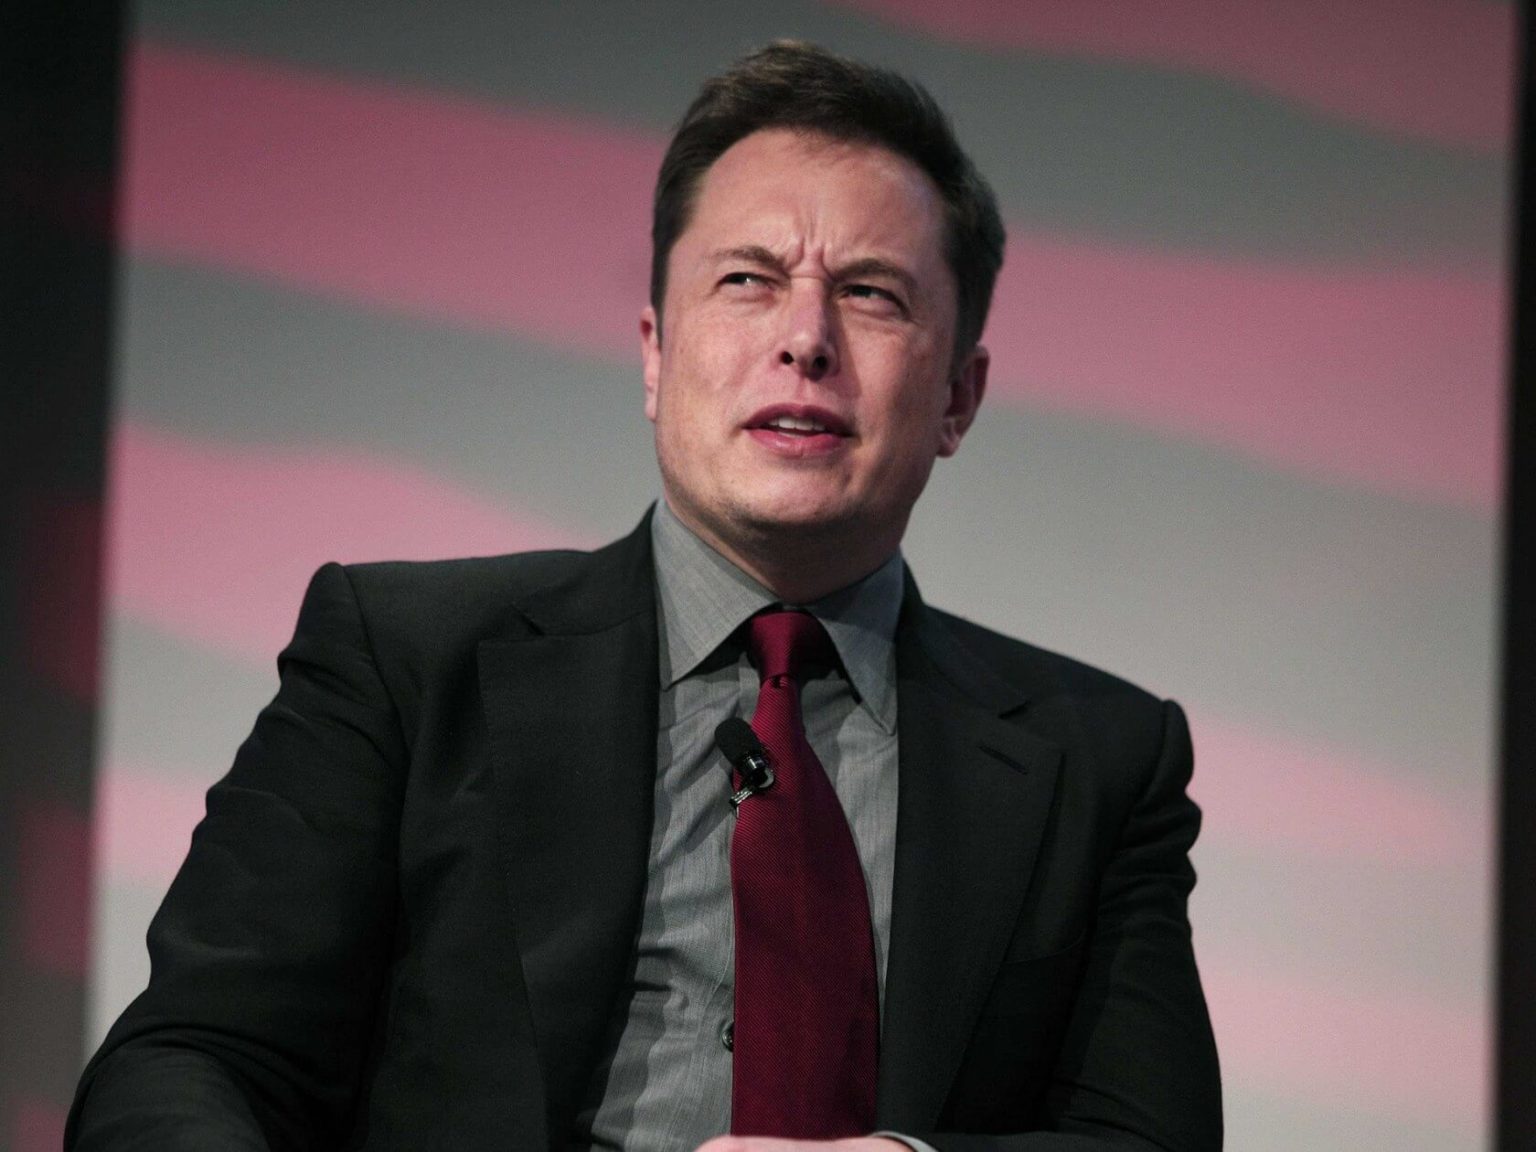 A Florida company called X is suing Elon Musk